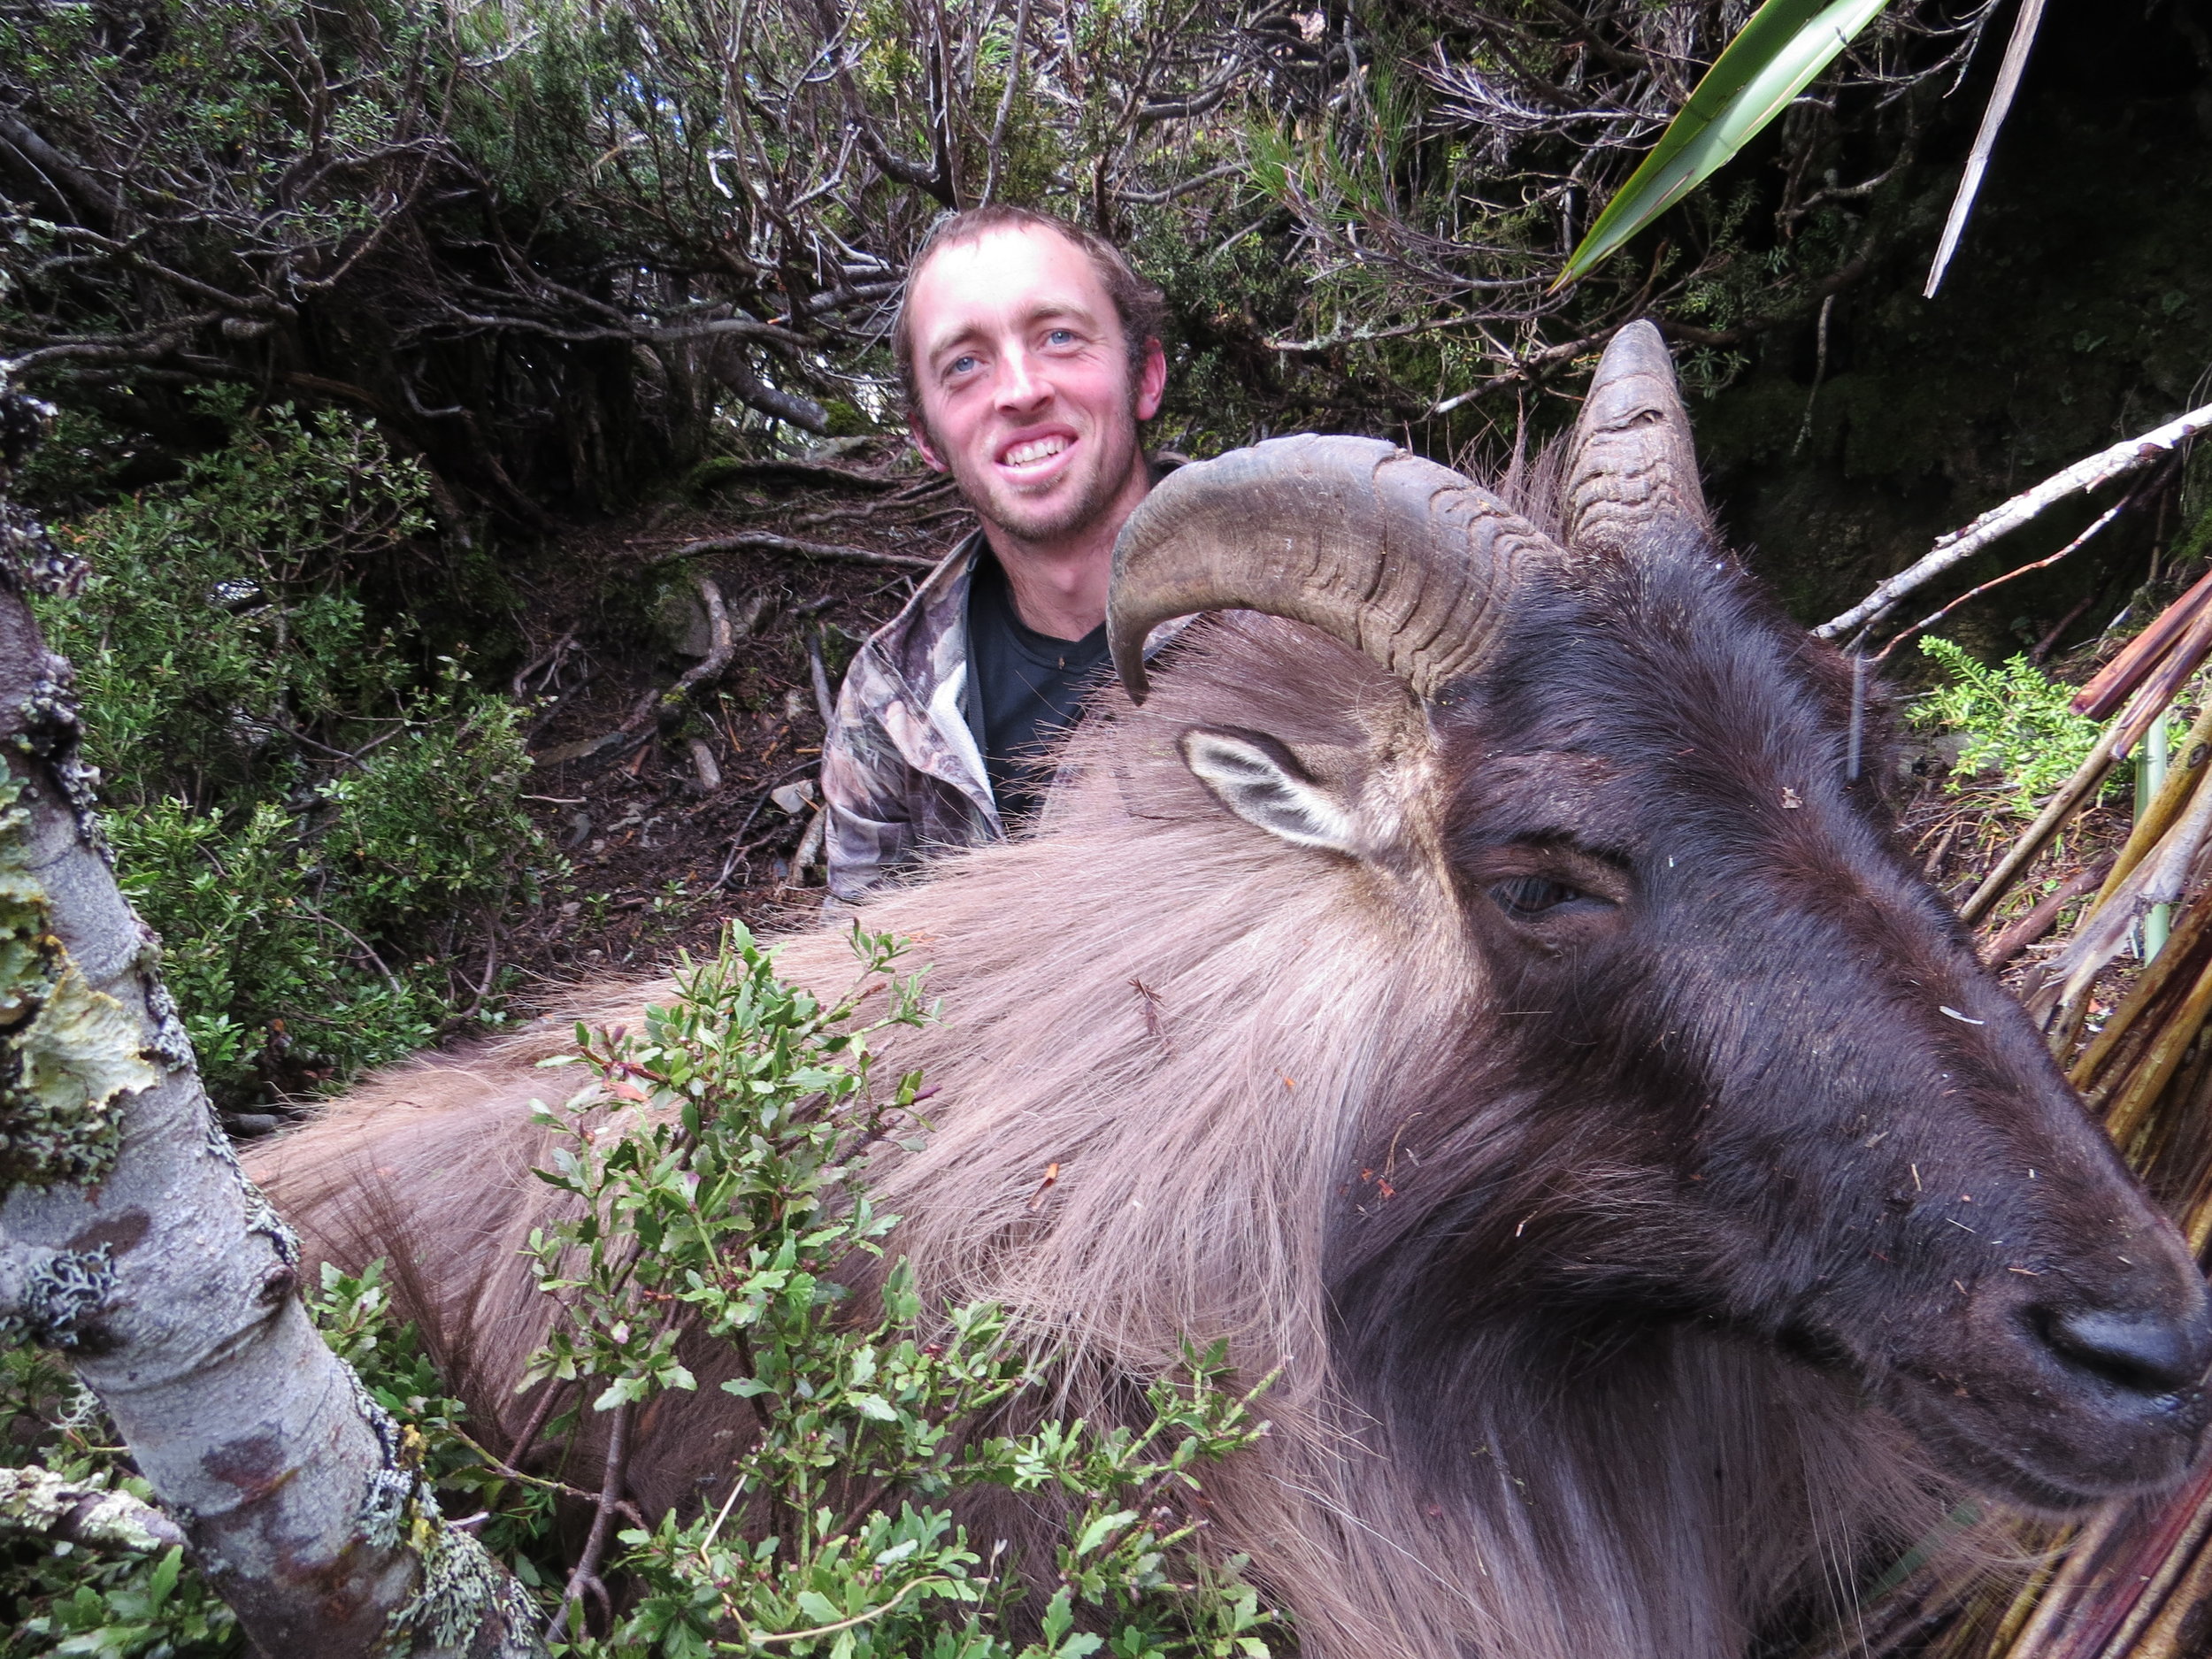  Ryan Carr with a 12 inch bull - Photo by Richie Williams 